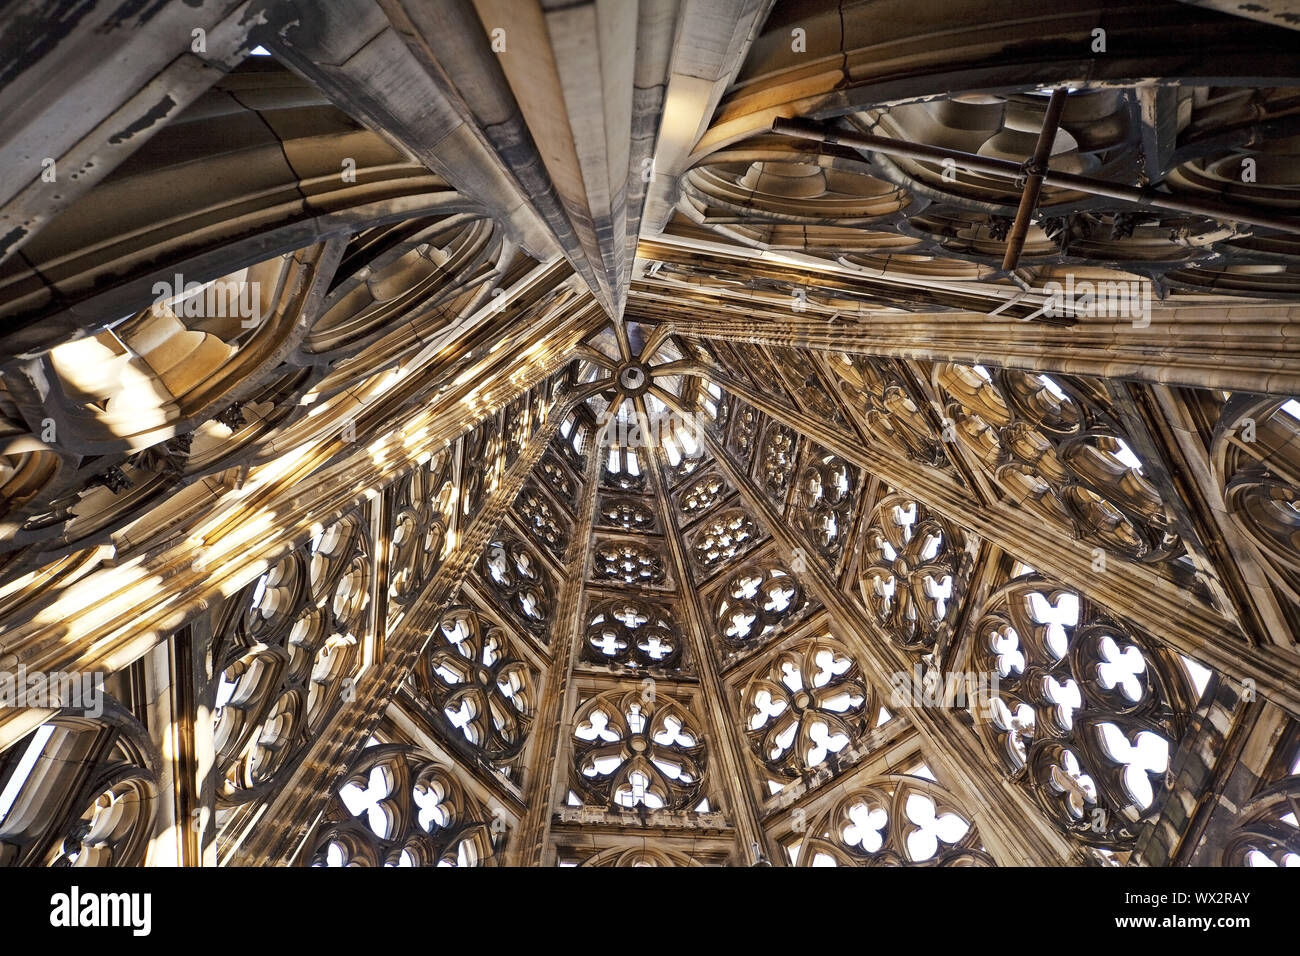 Cologne Cathedral, view into the top of a tower, Cologne, North Rhine-Westphalia, Germany, Europe Stock Photo